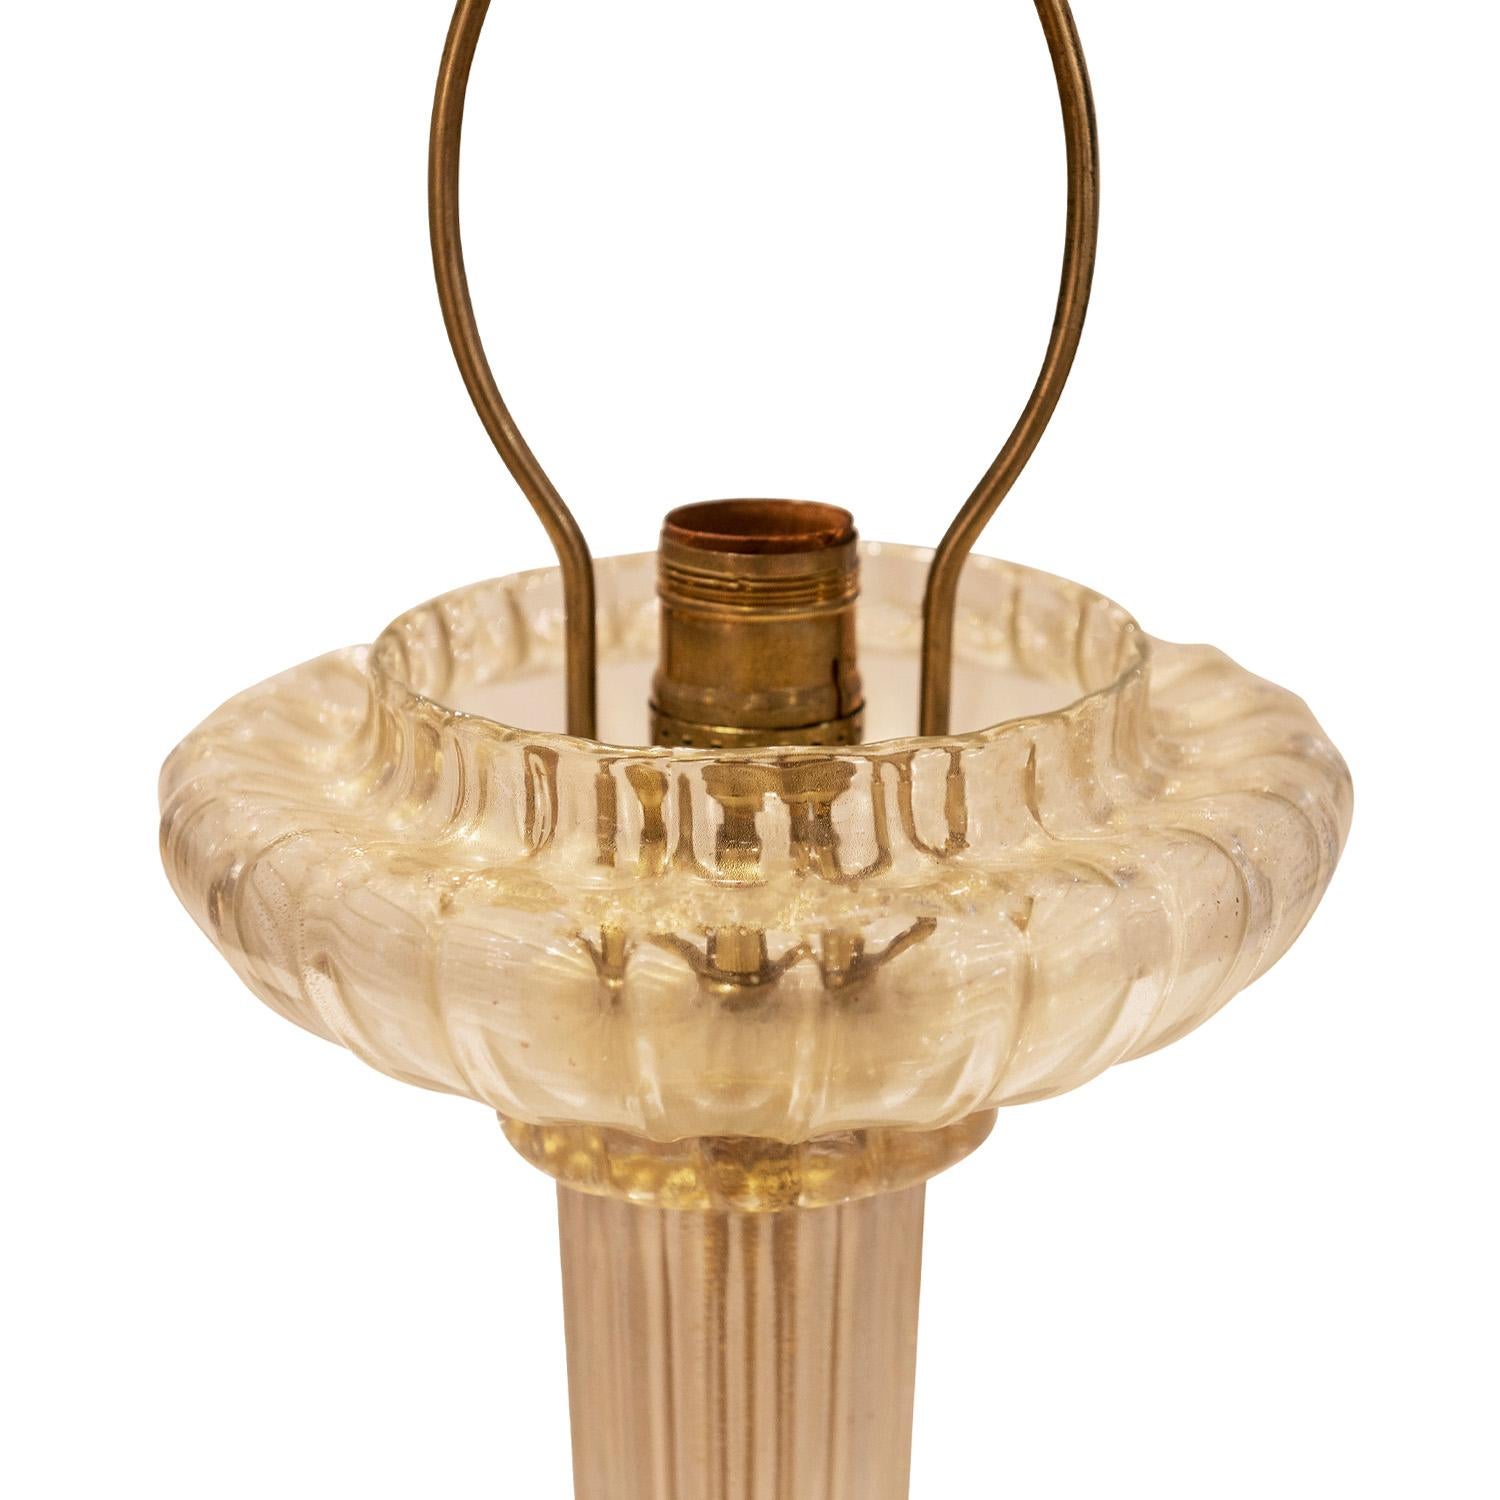 Mid-20th Century Seguso Rare Large Hand-Blown Torchere Lamp with Gold Foil, 1950s For Sale